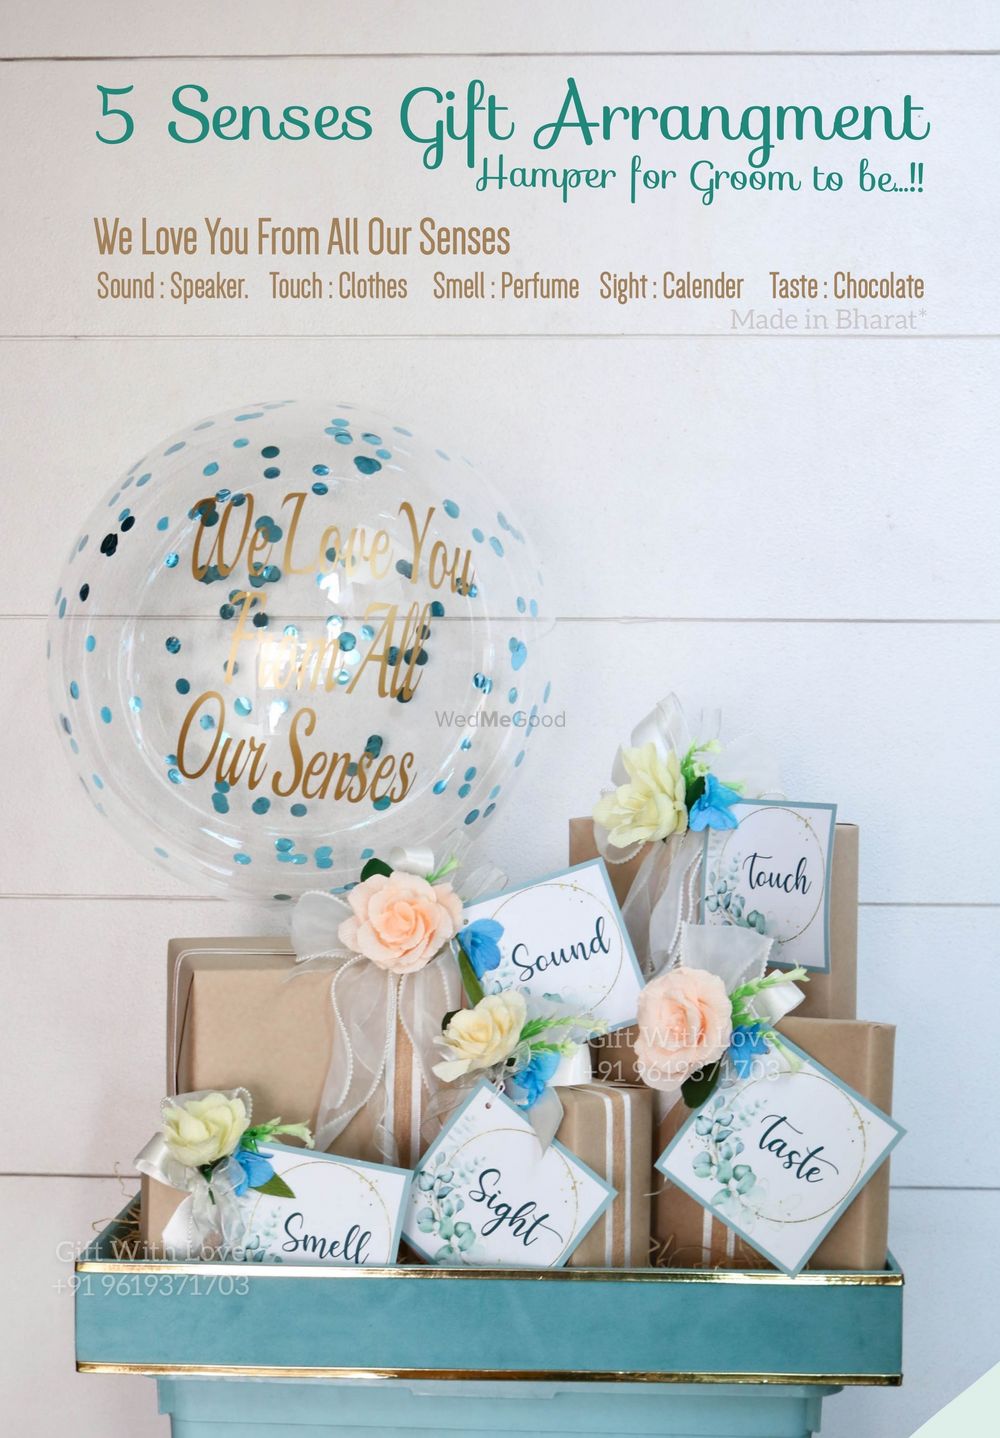 Photo From Wedding Invitation Hampers, Wedding Giveaway and Room Hampers - By Gift with Love